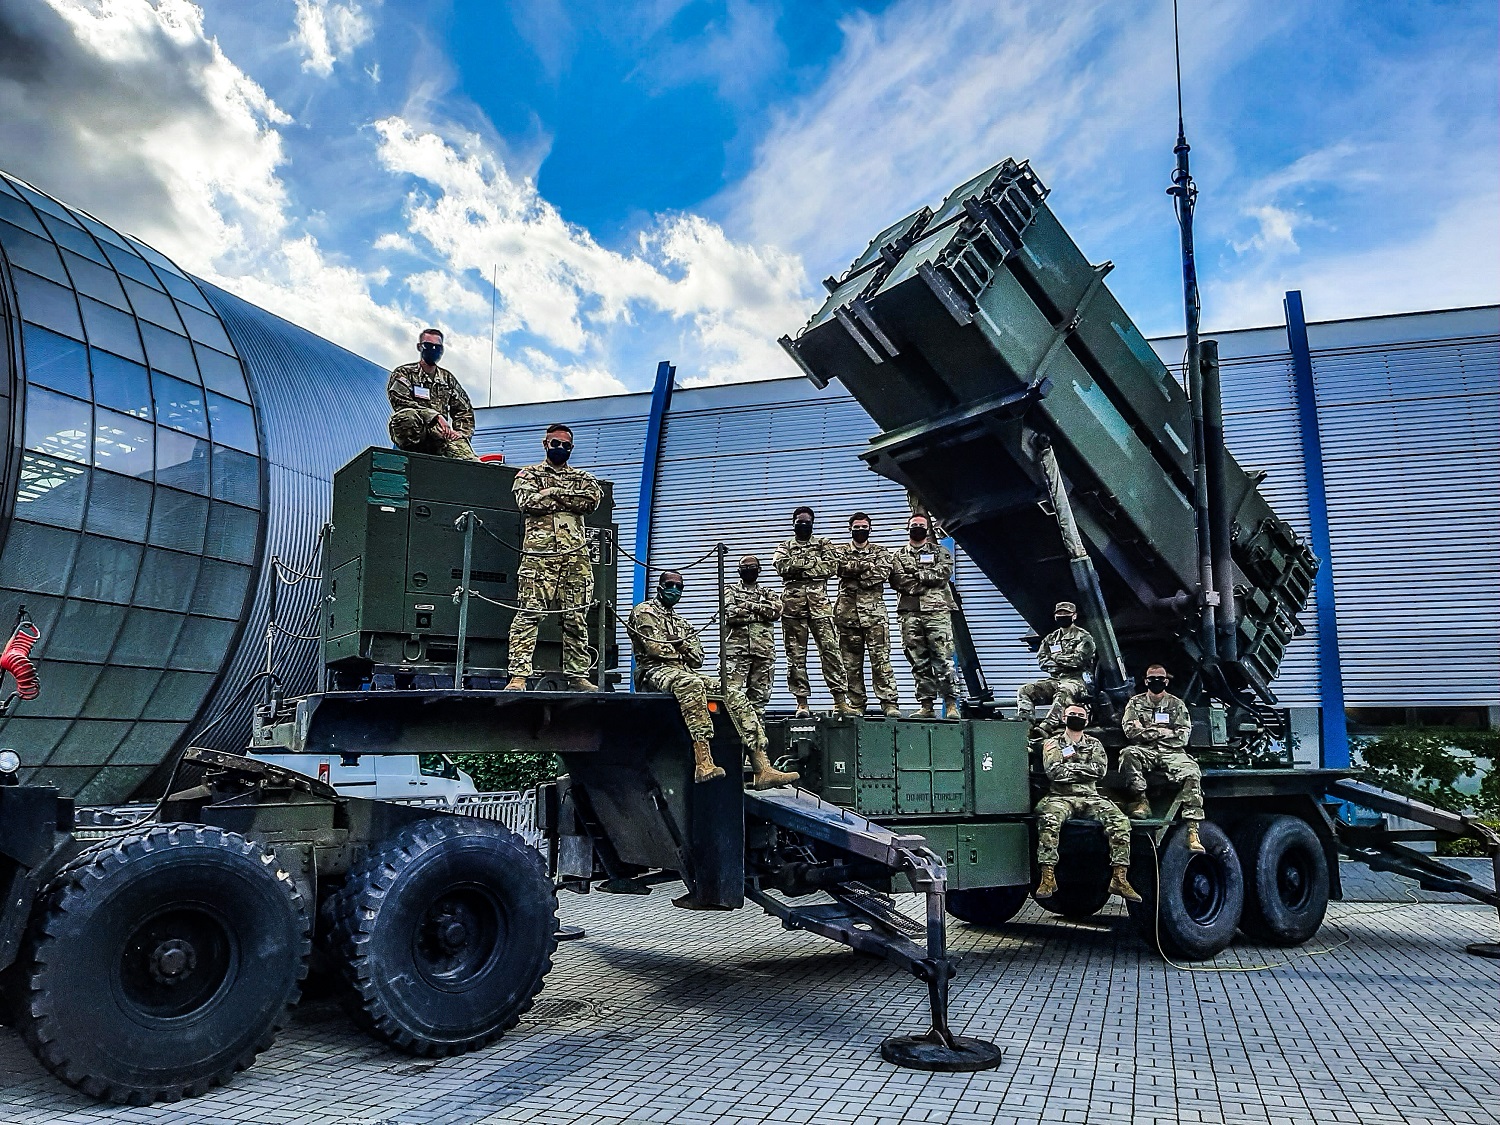 Soldiers from U.S. Army Alpha Battery, 5th Battalion, 7th Air Defense Artillery Regiment on a M901 Patriot Launching Station in Targi Kielce, Poland.